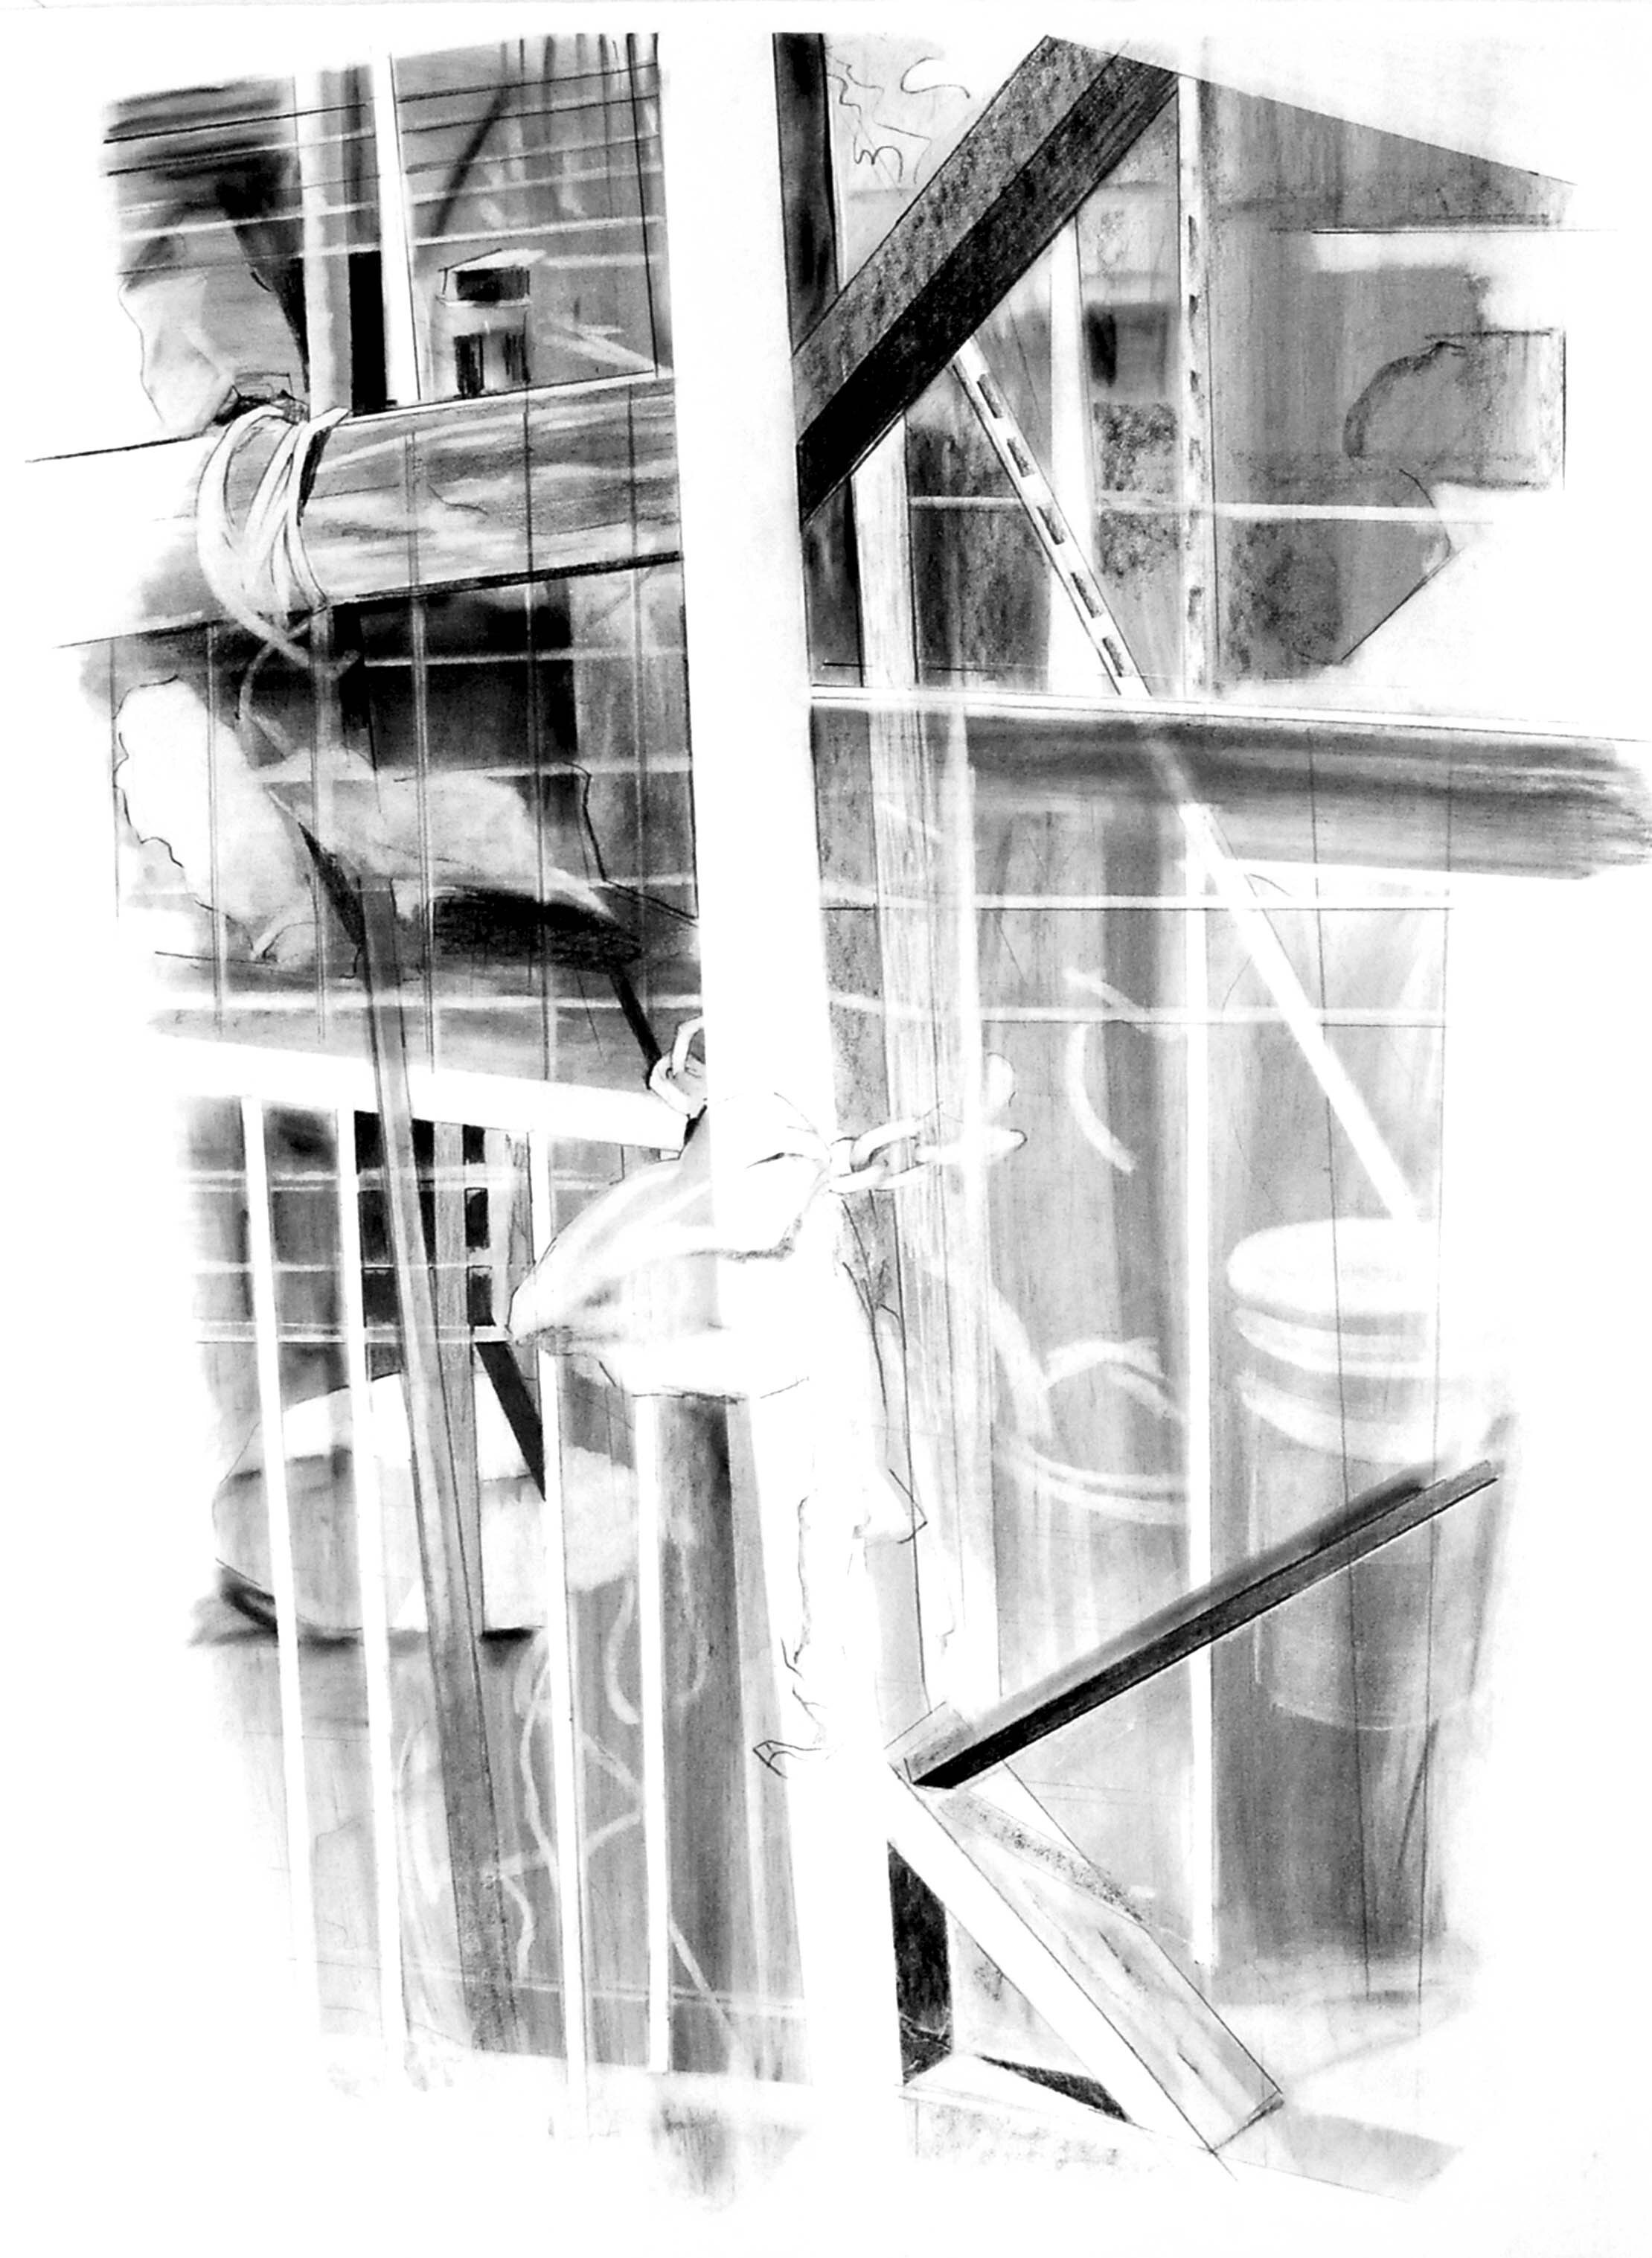   City Garden  charcoal on paper  22” x 30”  2007 